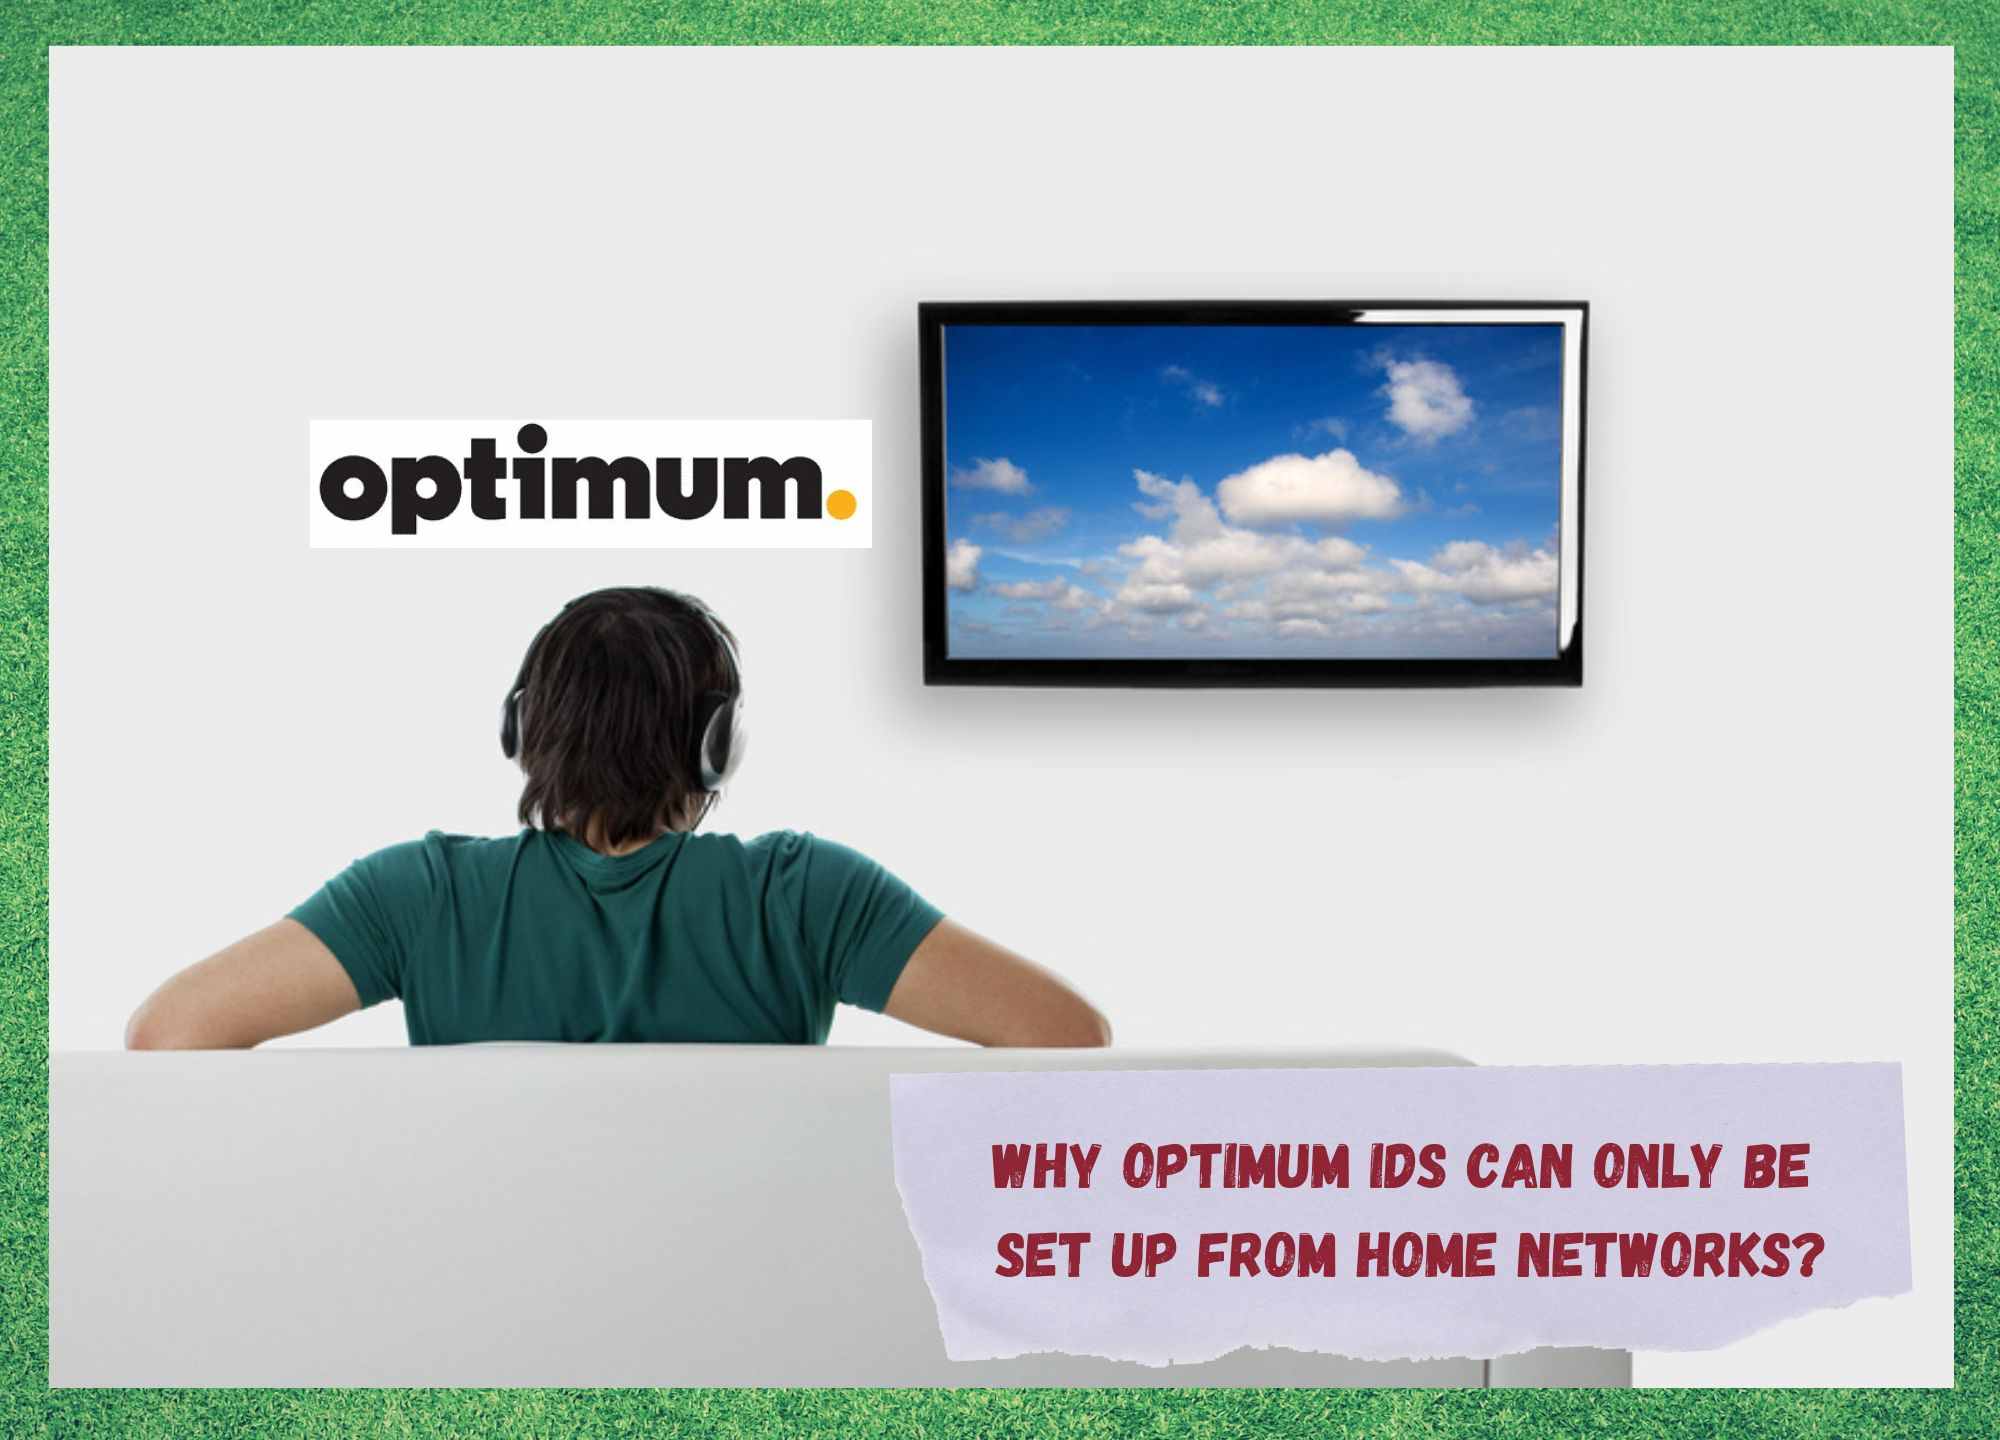 you can only create an optimum id from your home network